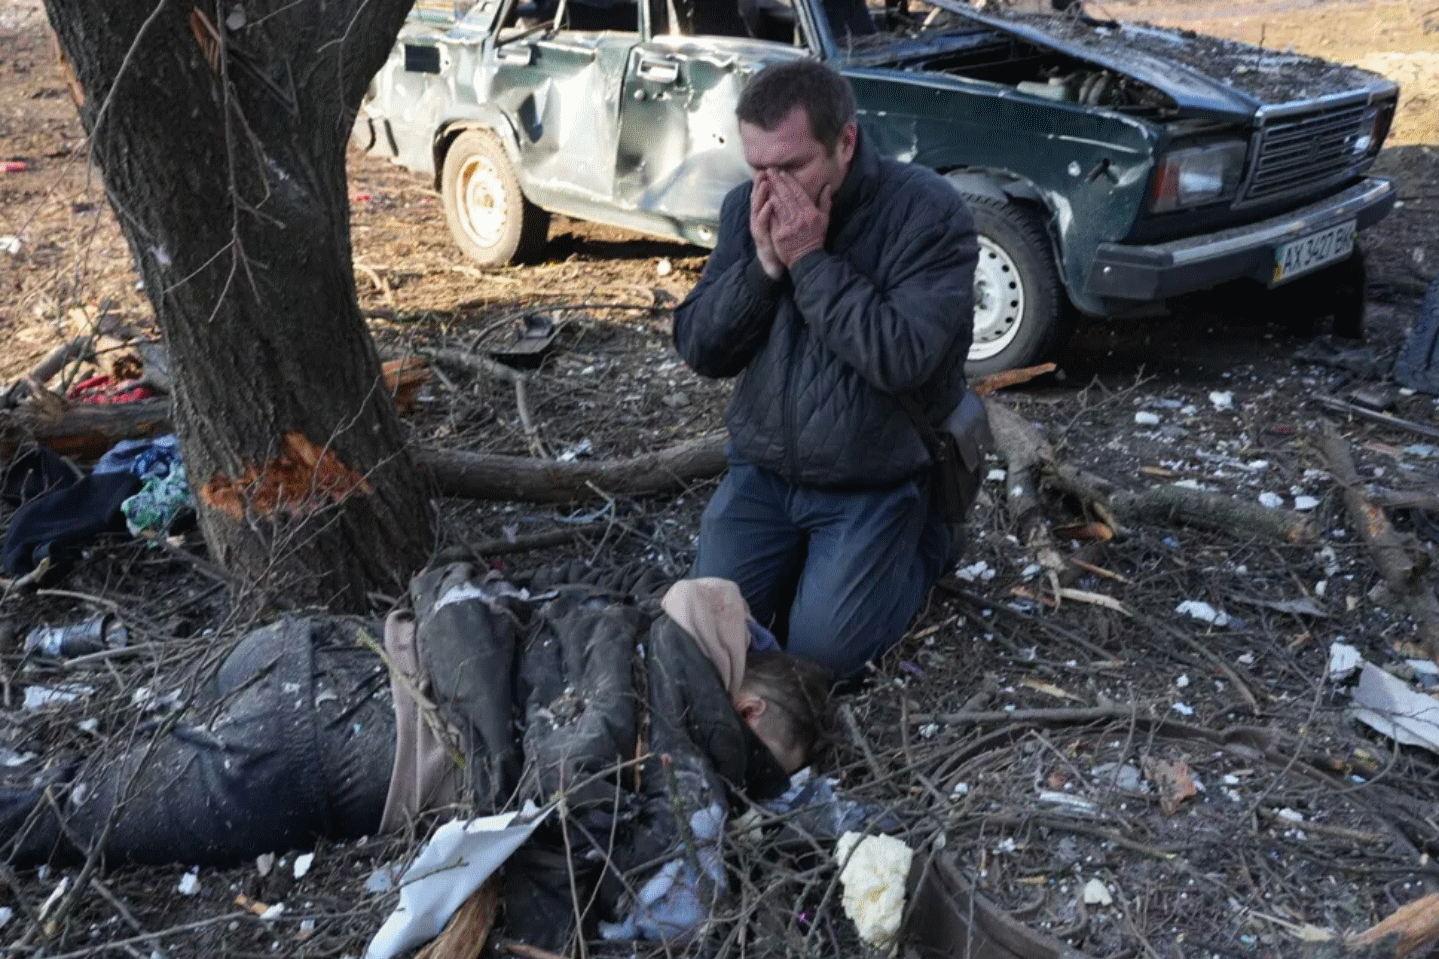 A Ukrainian civilian mourning a dead man. Retrieved from the Huffington Post.